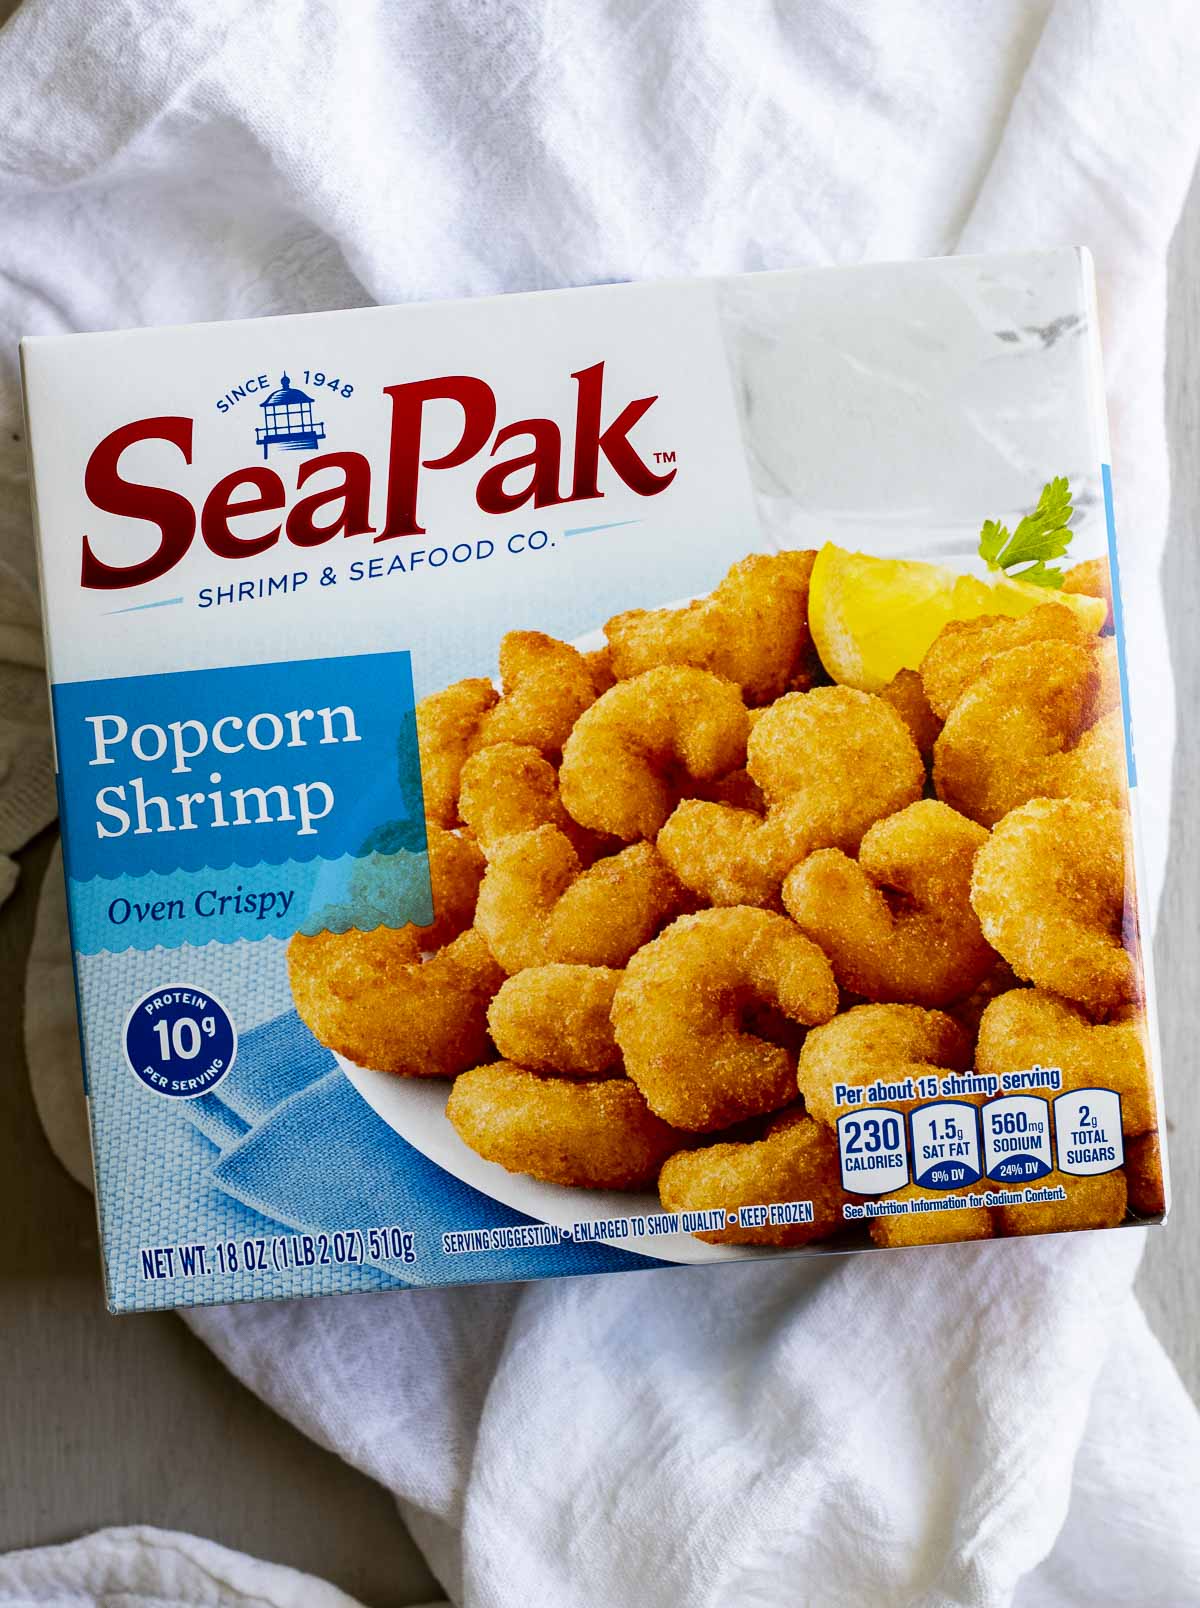 A package of frozen popcorn shrimp on a white cloth.